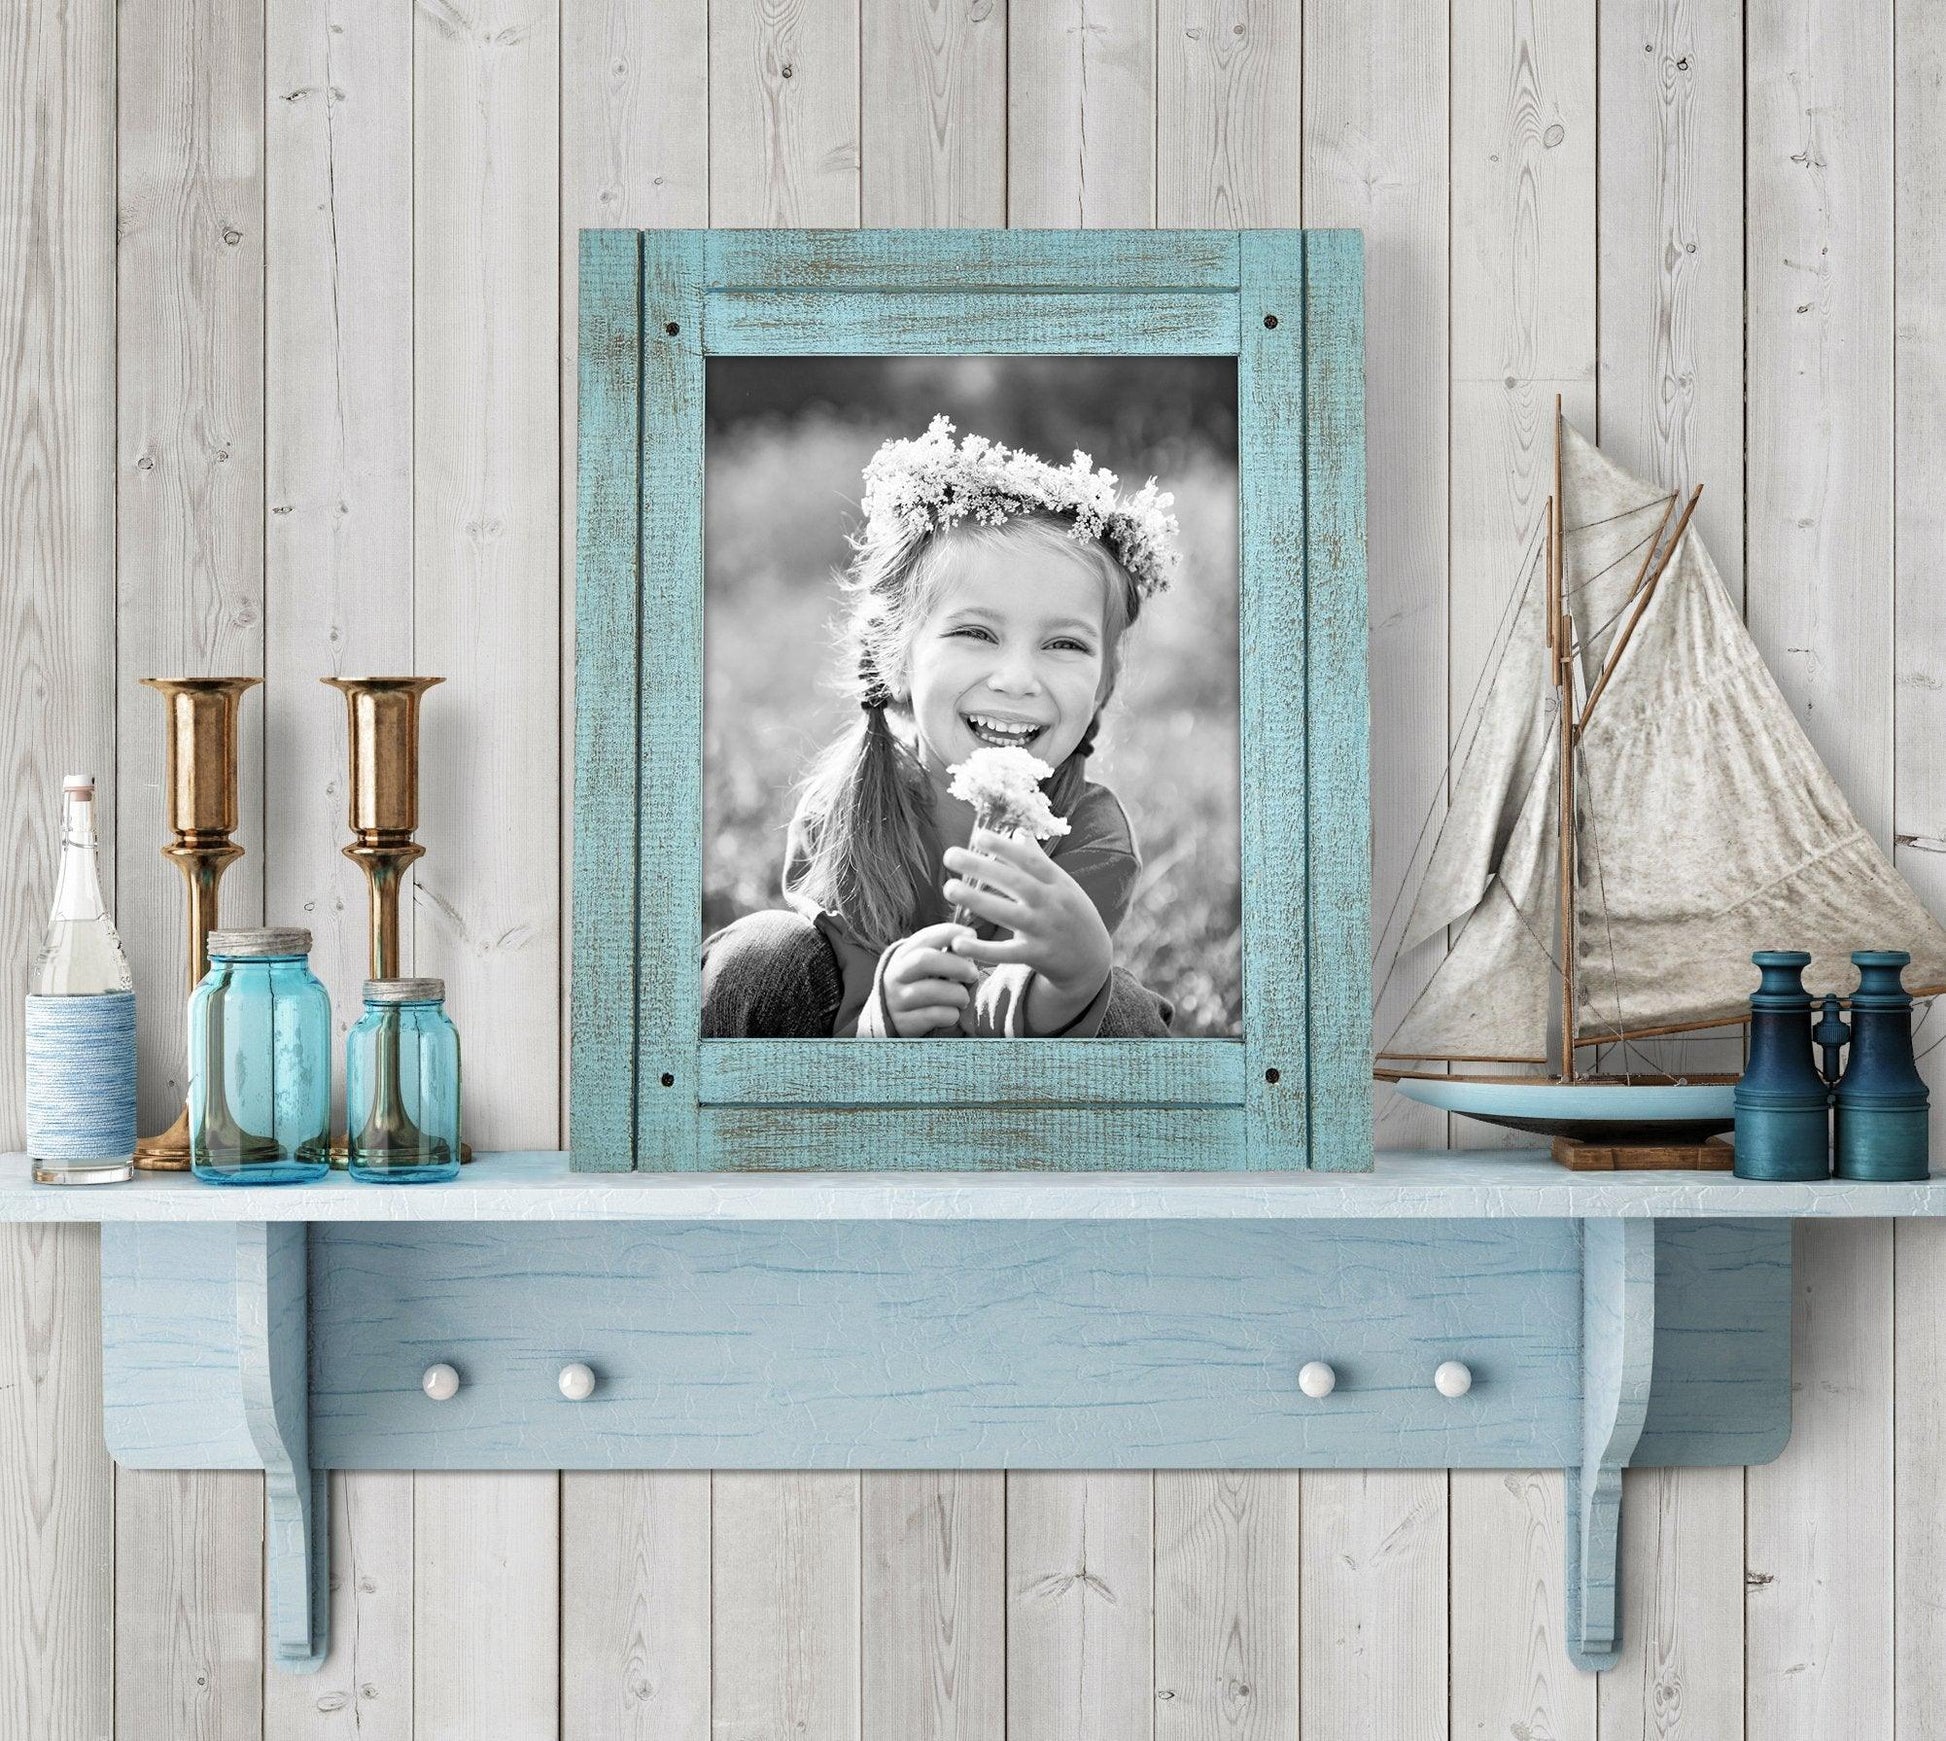 Americanflat 4x6 Triple Picture Frame in White - Distressed Wood Decorative  Picture Frames with Easel and Polished Glass for Family Photos and Wall  Collage - for Wall and Tabletop 